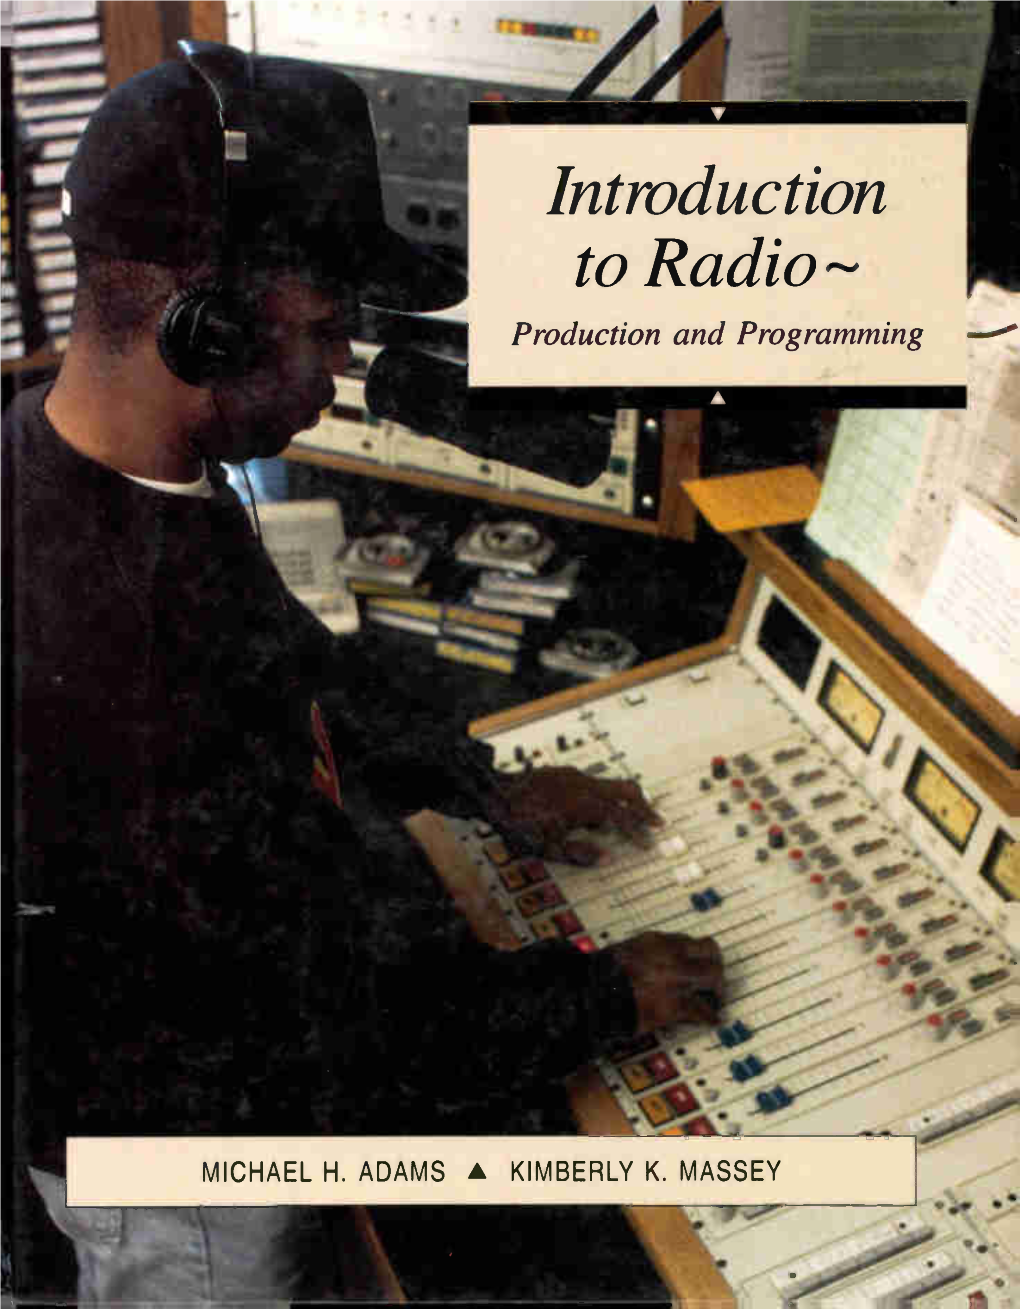 Introduction to Radio,-, Production and Programming